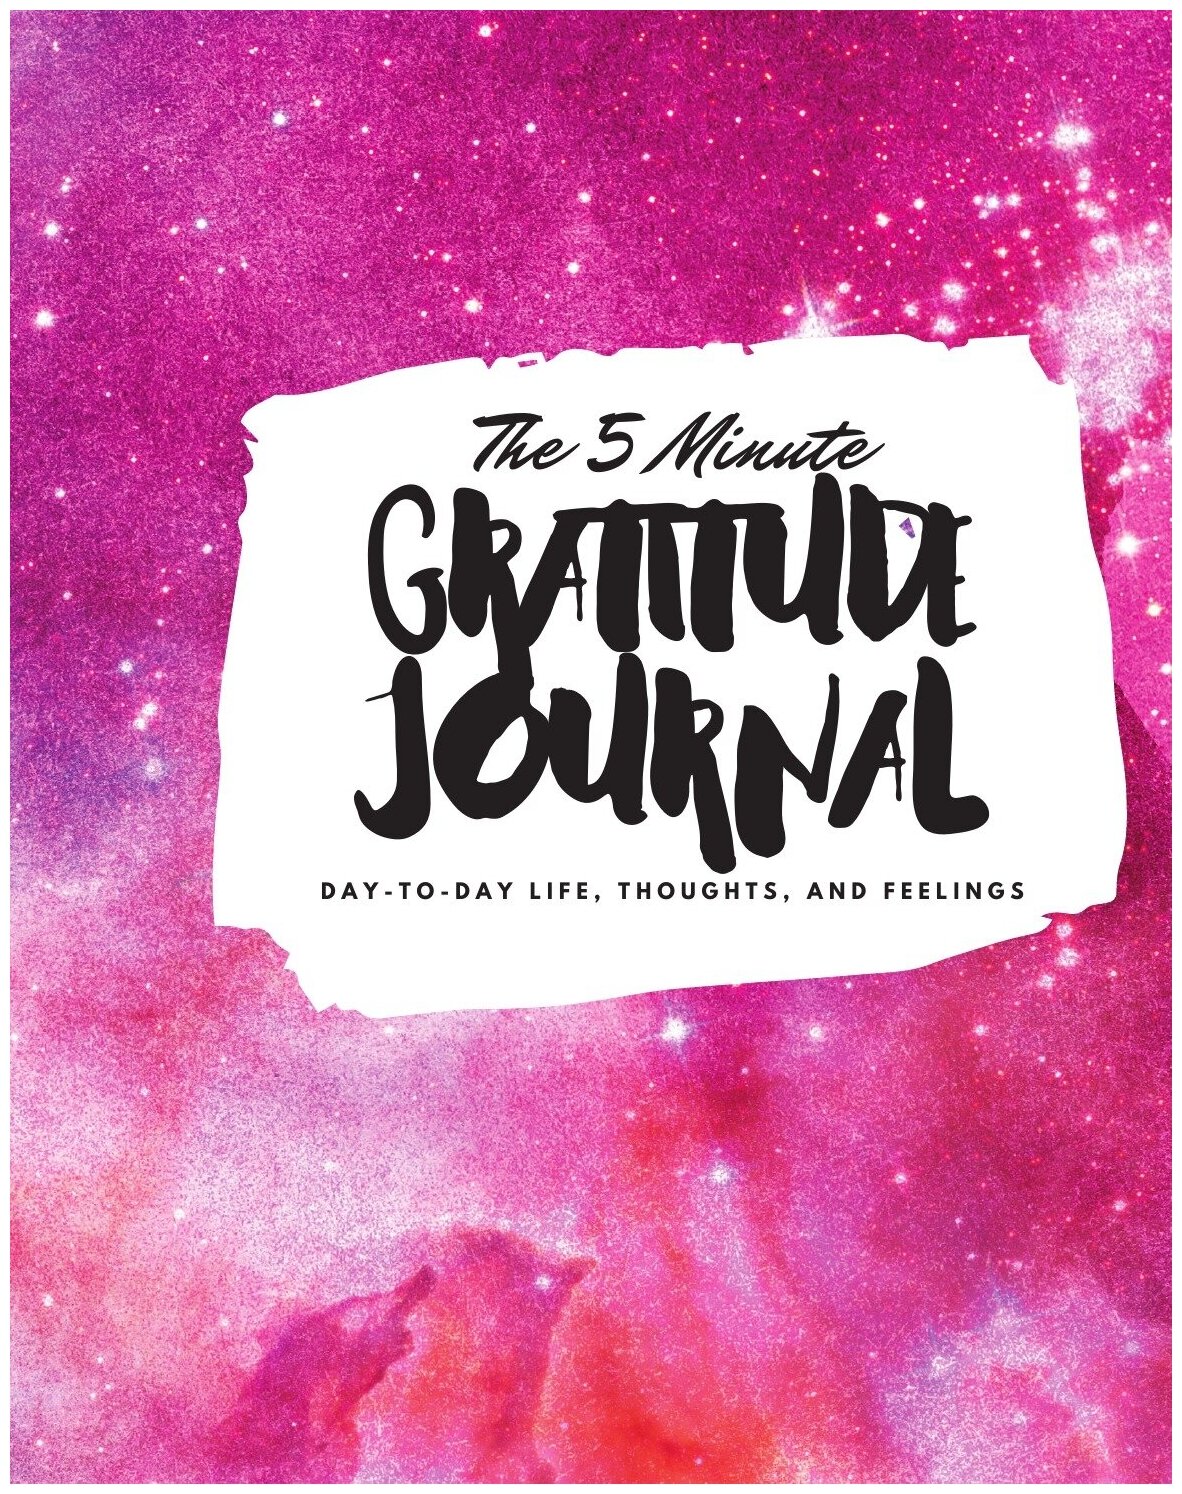 The 5 Minute Gratitude Journal. Day-To-Day Life, Thoughts, and Feelings (8x10 Softcover Journal)